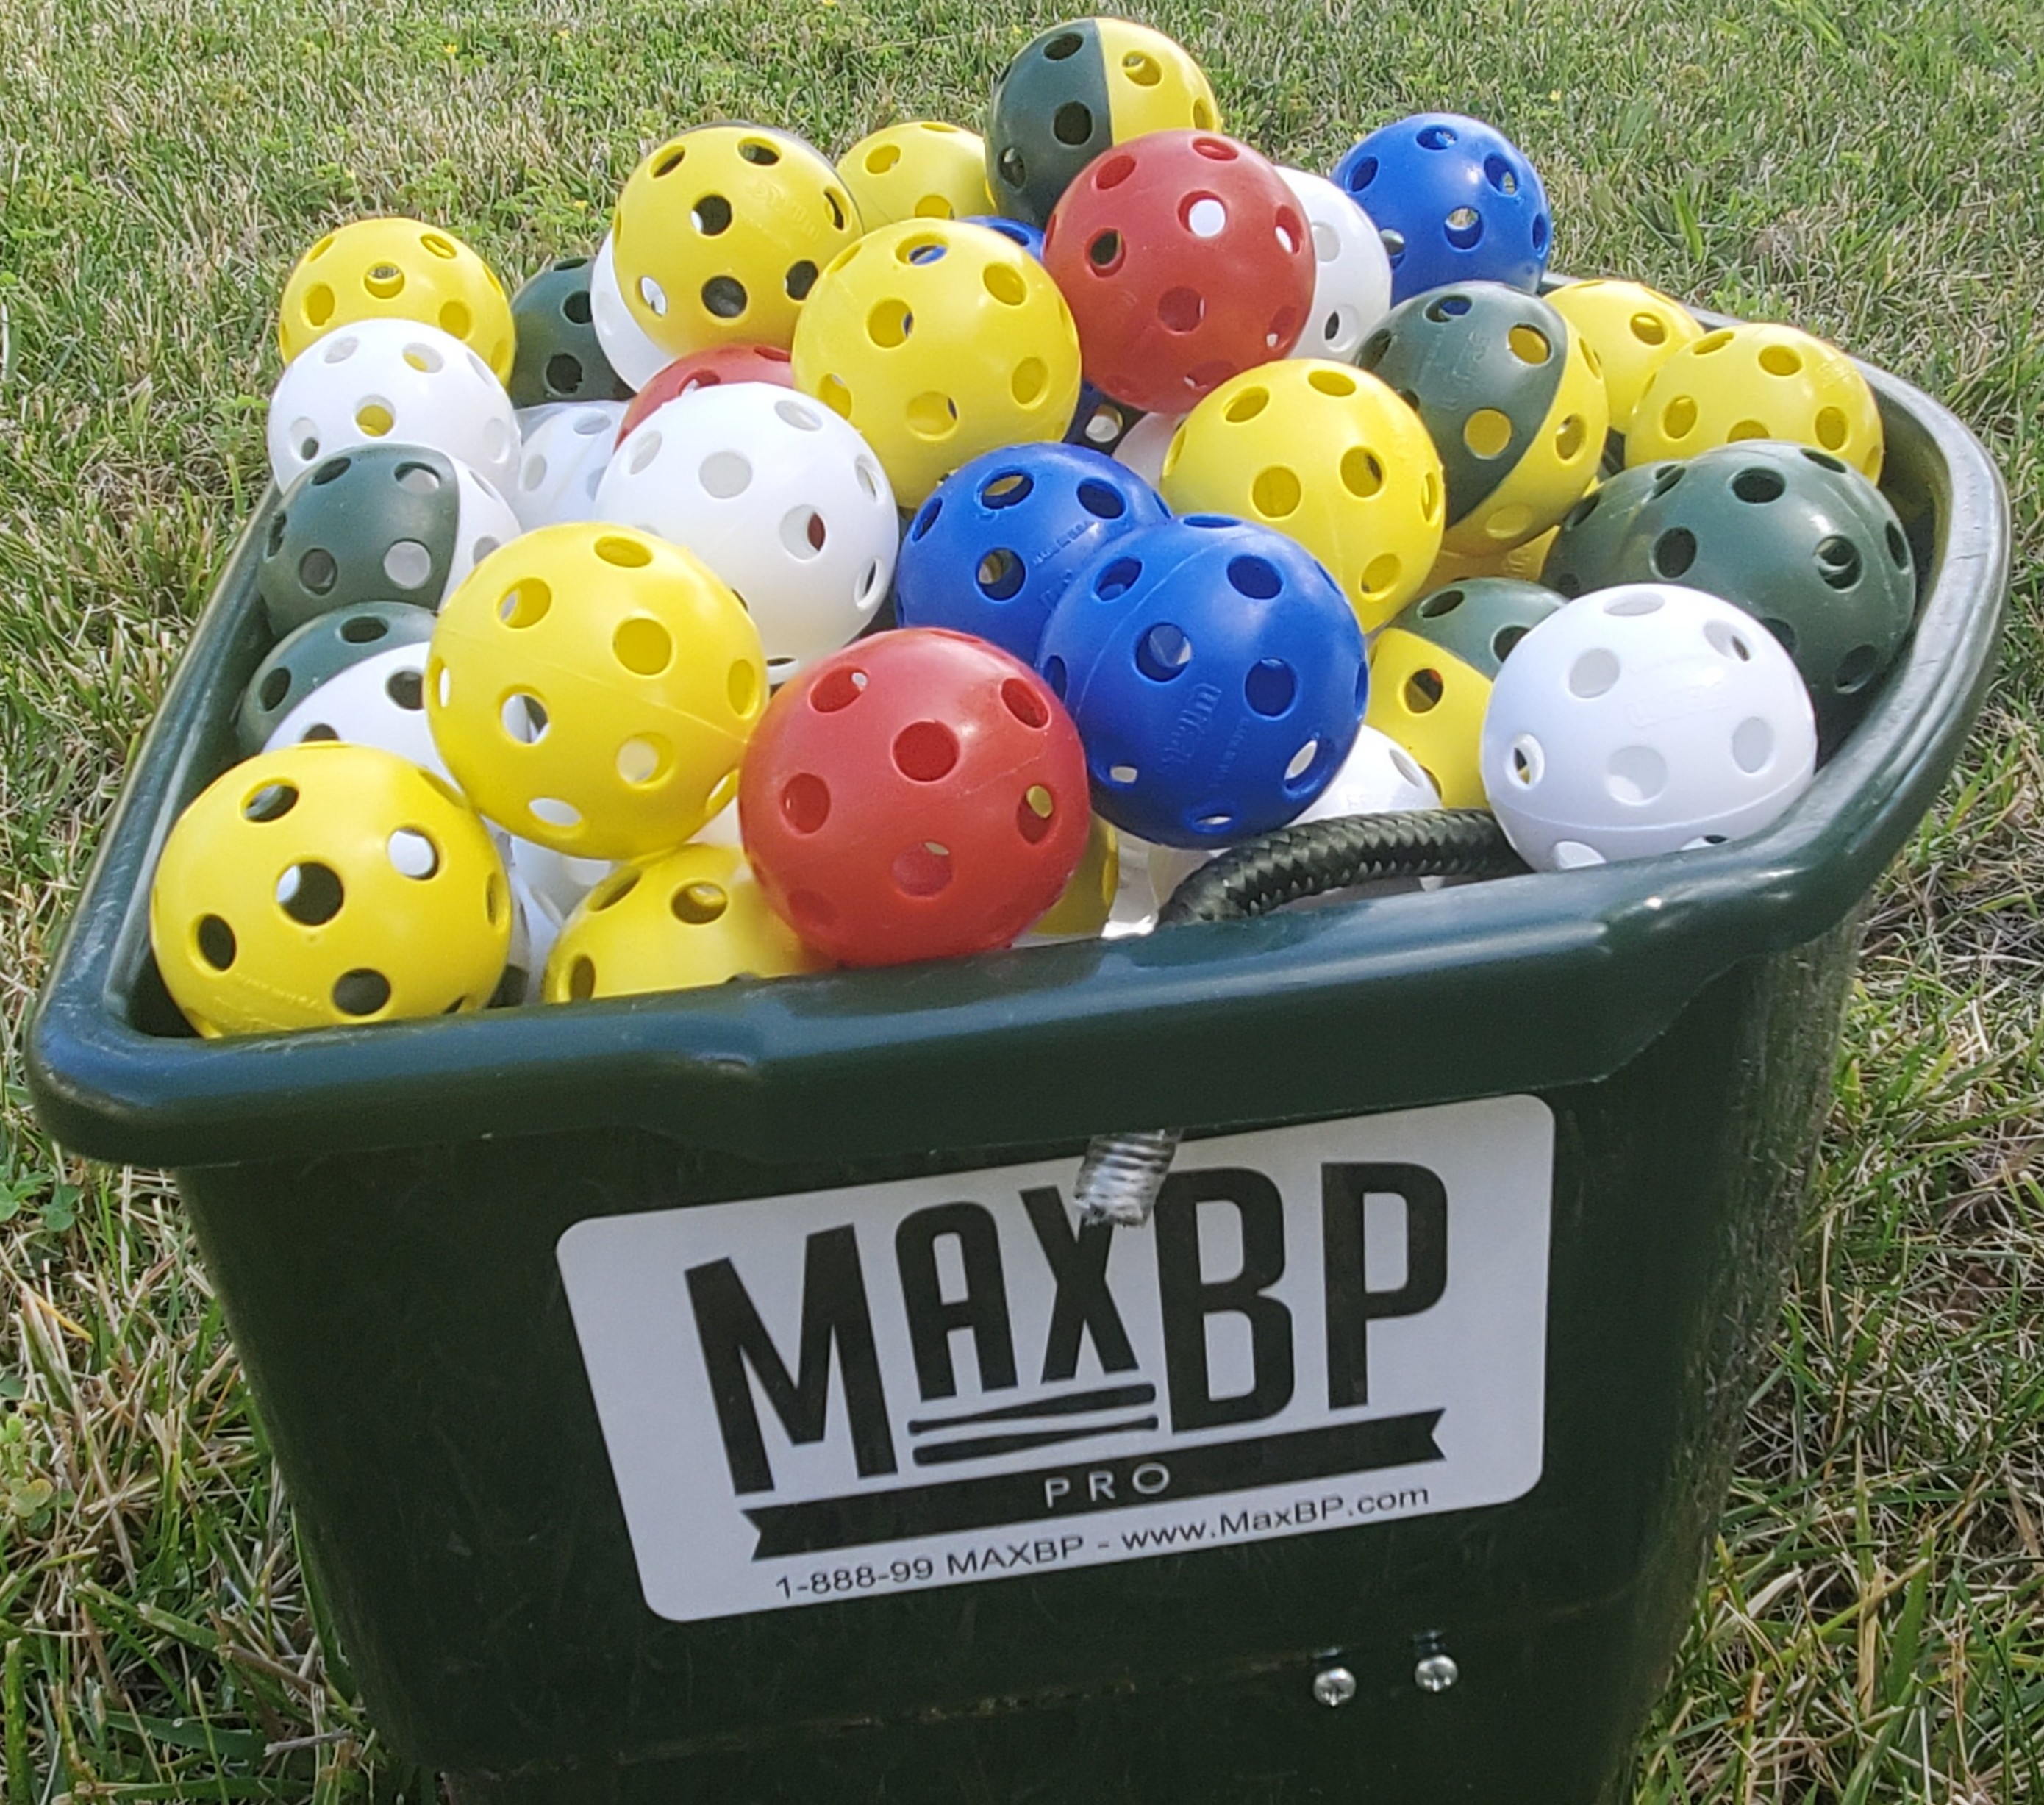 MaxBP has jelly bean wiffle balls that will any hitter in training develop better vision and hand-eye coordination in the batter's box.